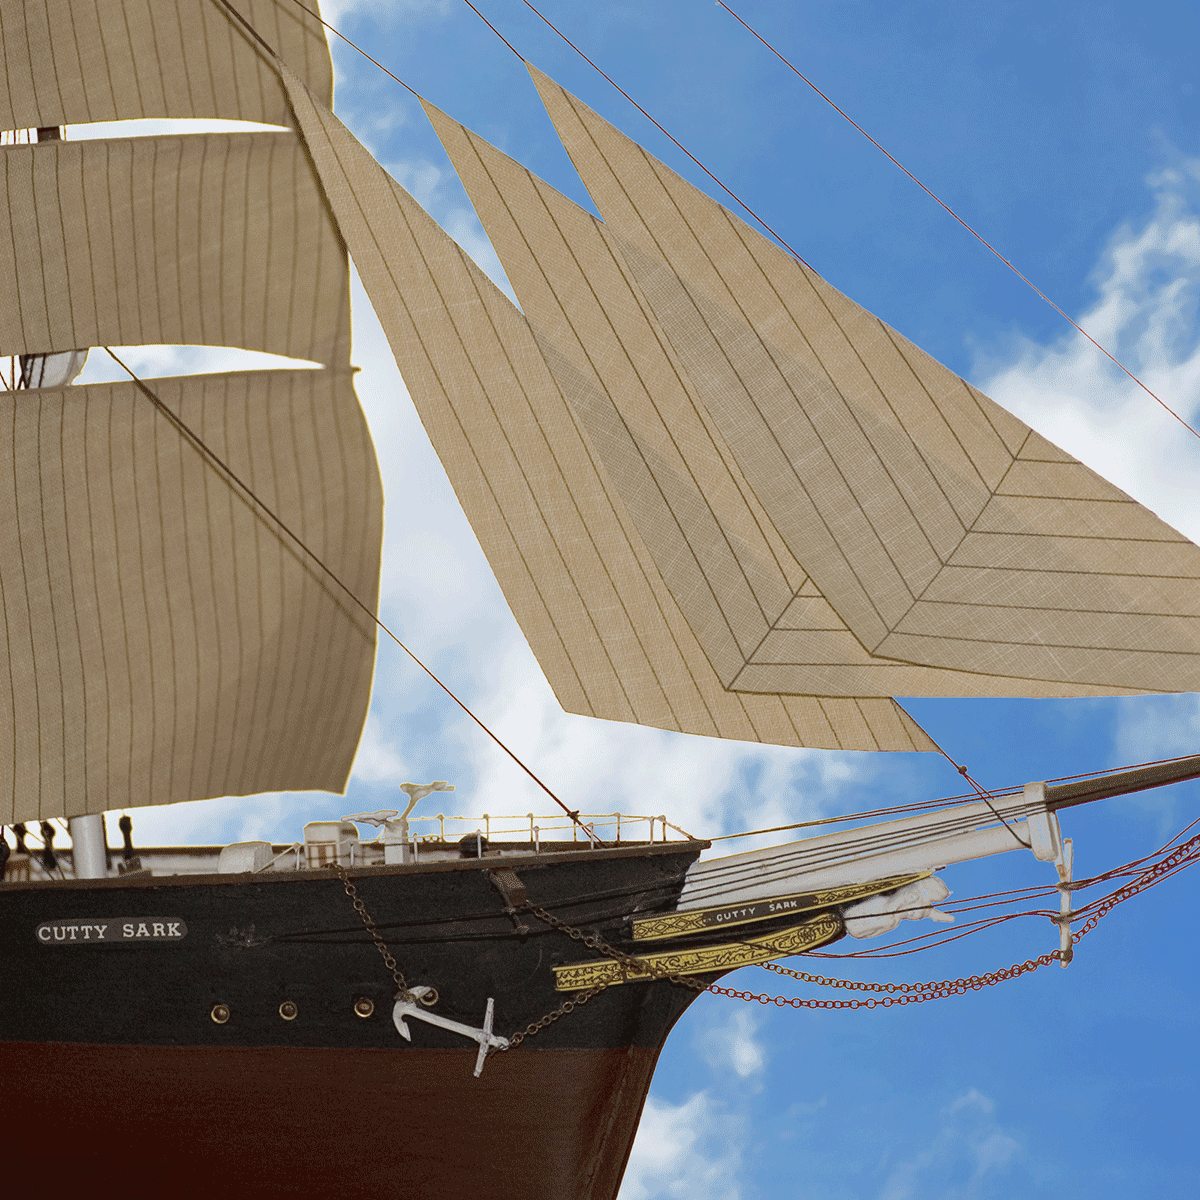 https://www.ntrltd.com/wp-content/uploads/2021/10/NTR-projects-cutty-sark-2.png